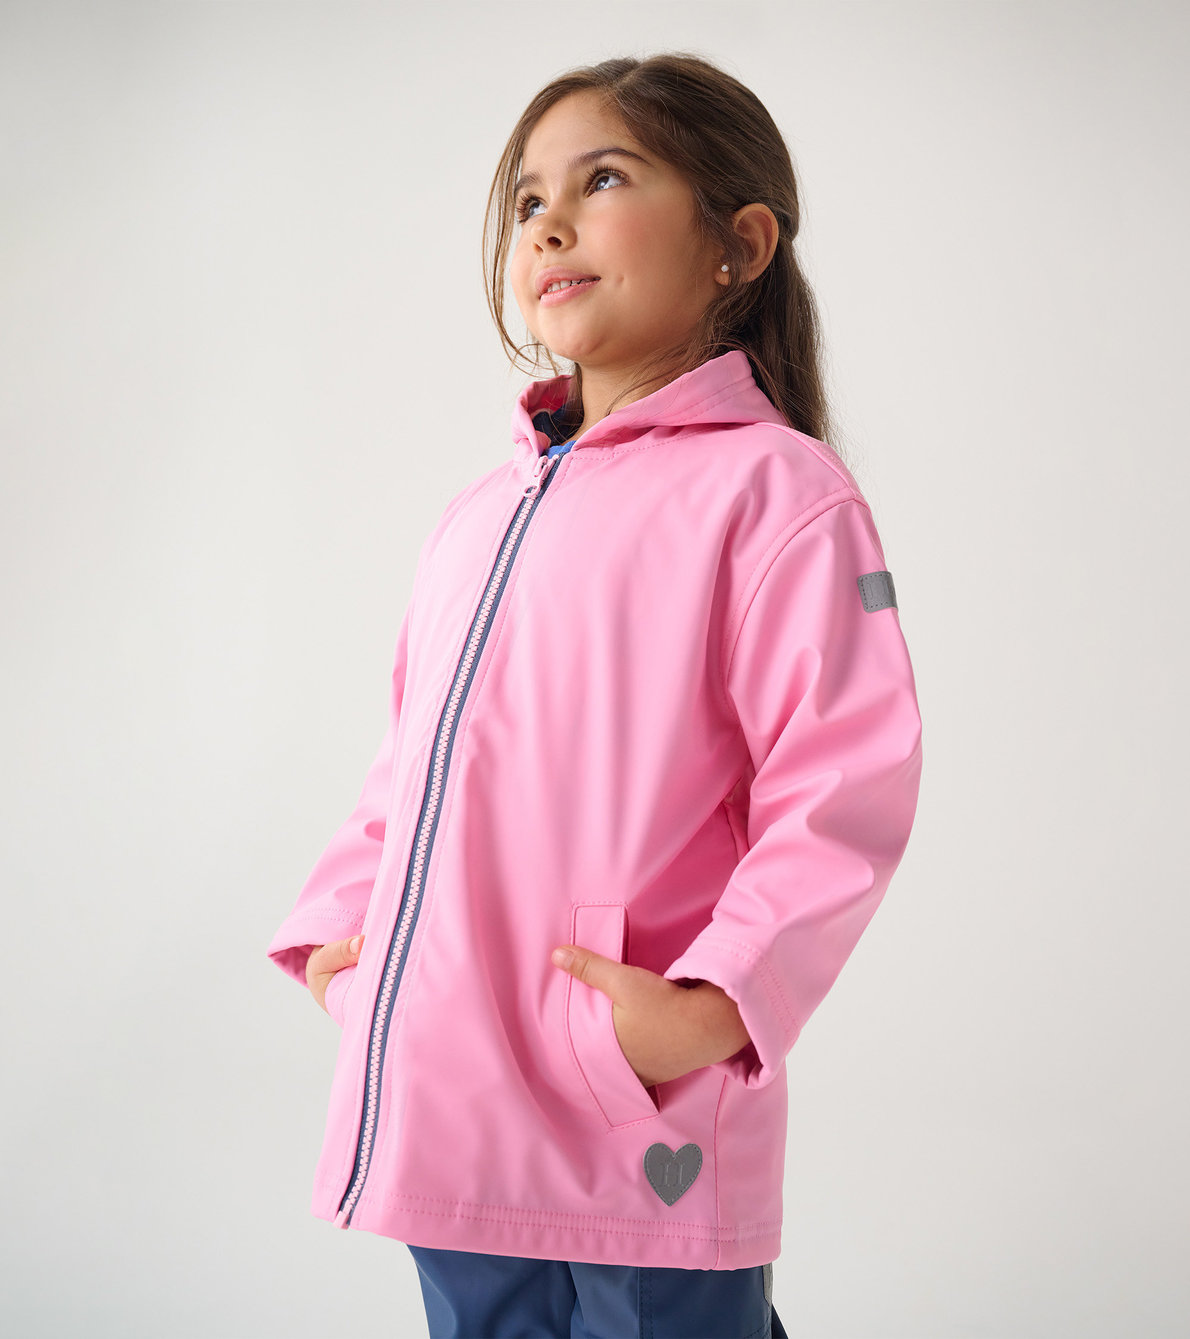 View larger image of Girls Classic Pink Zip-Up Raincoat